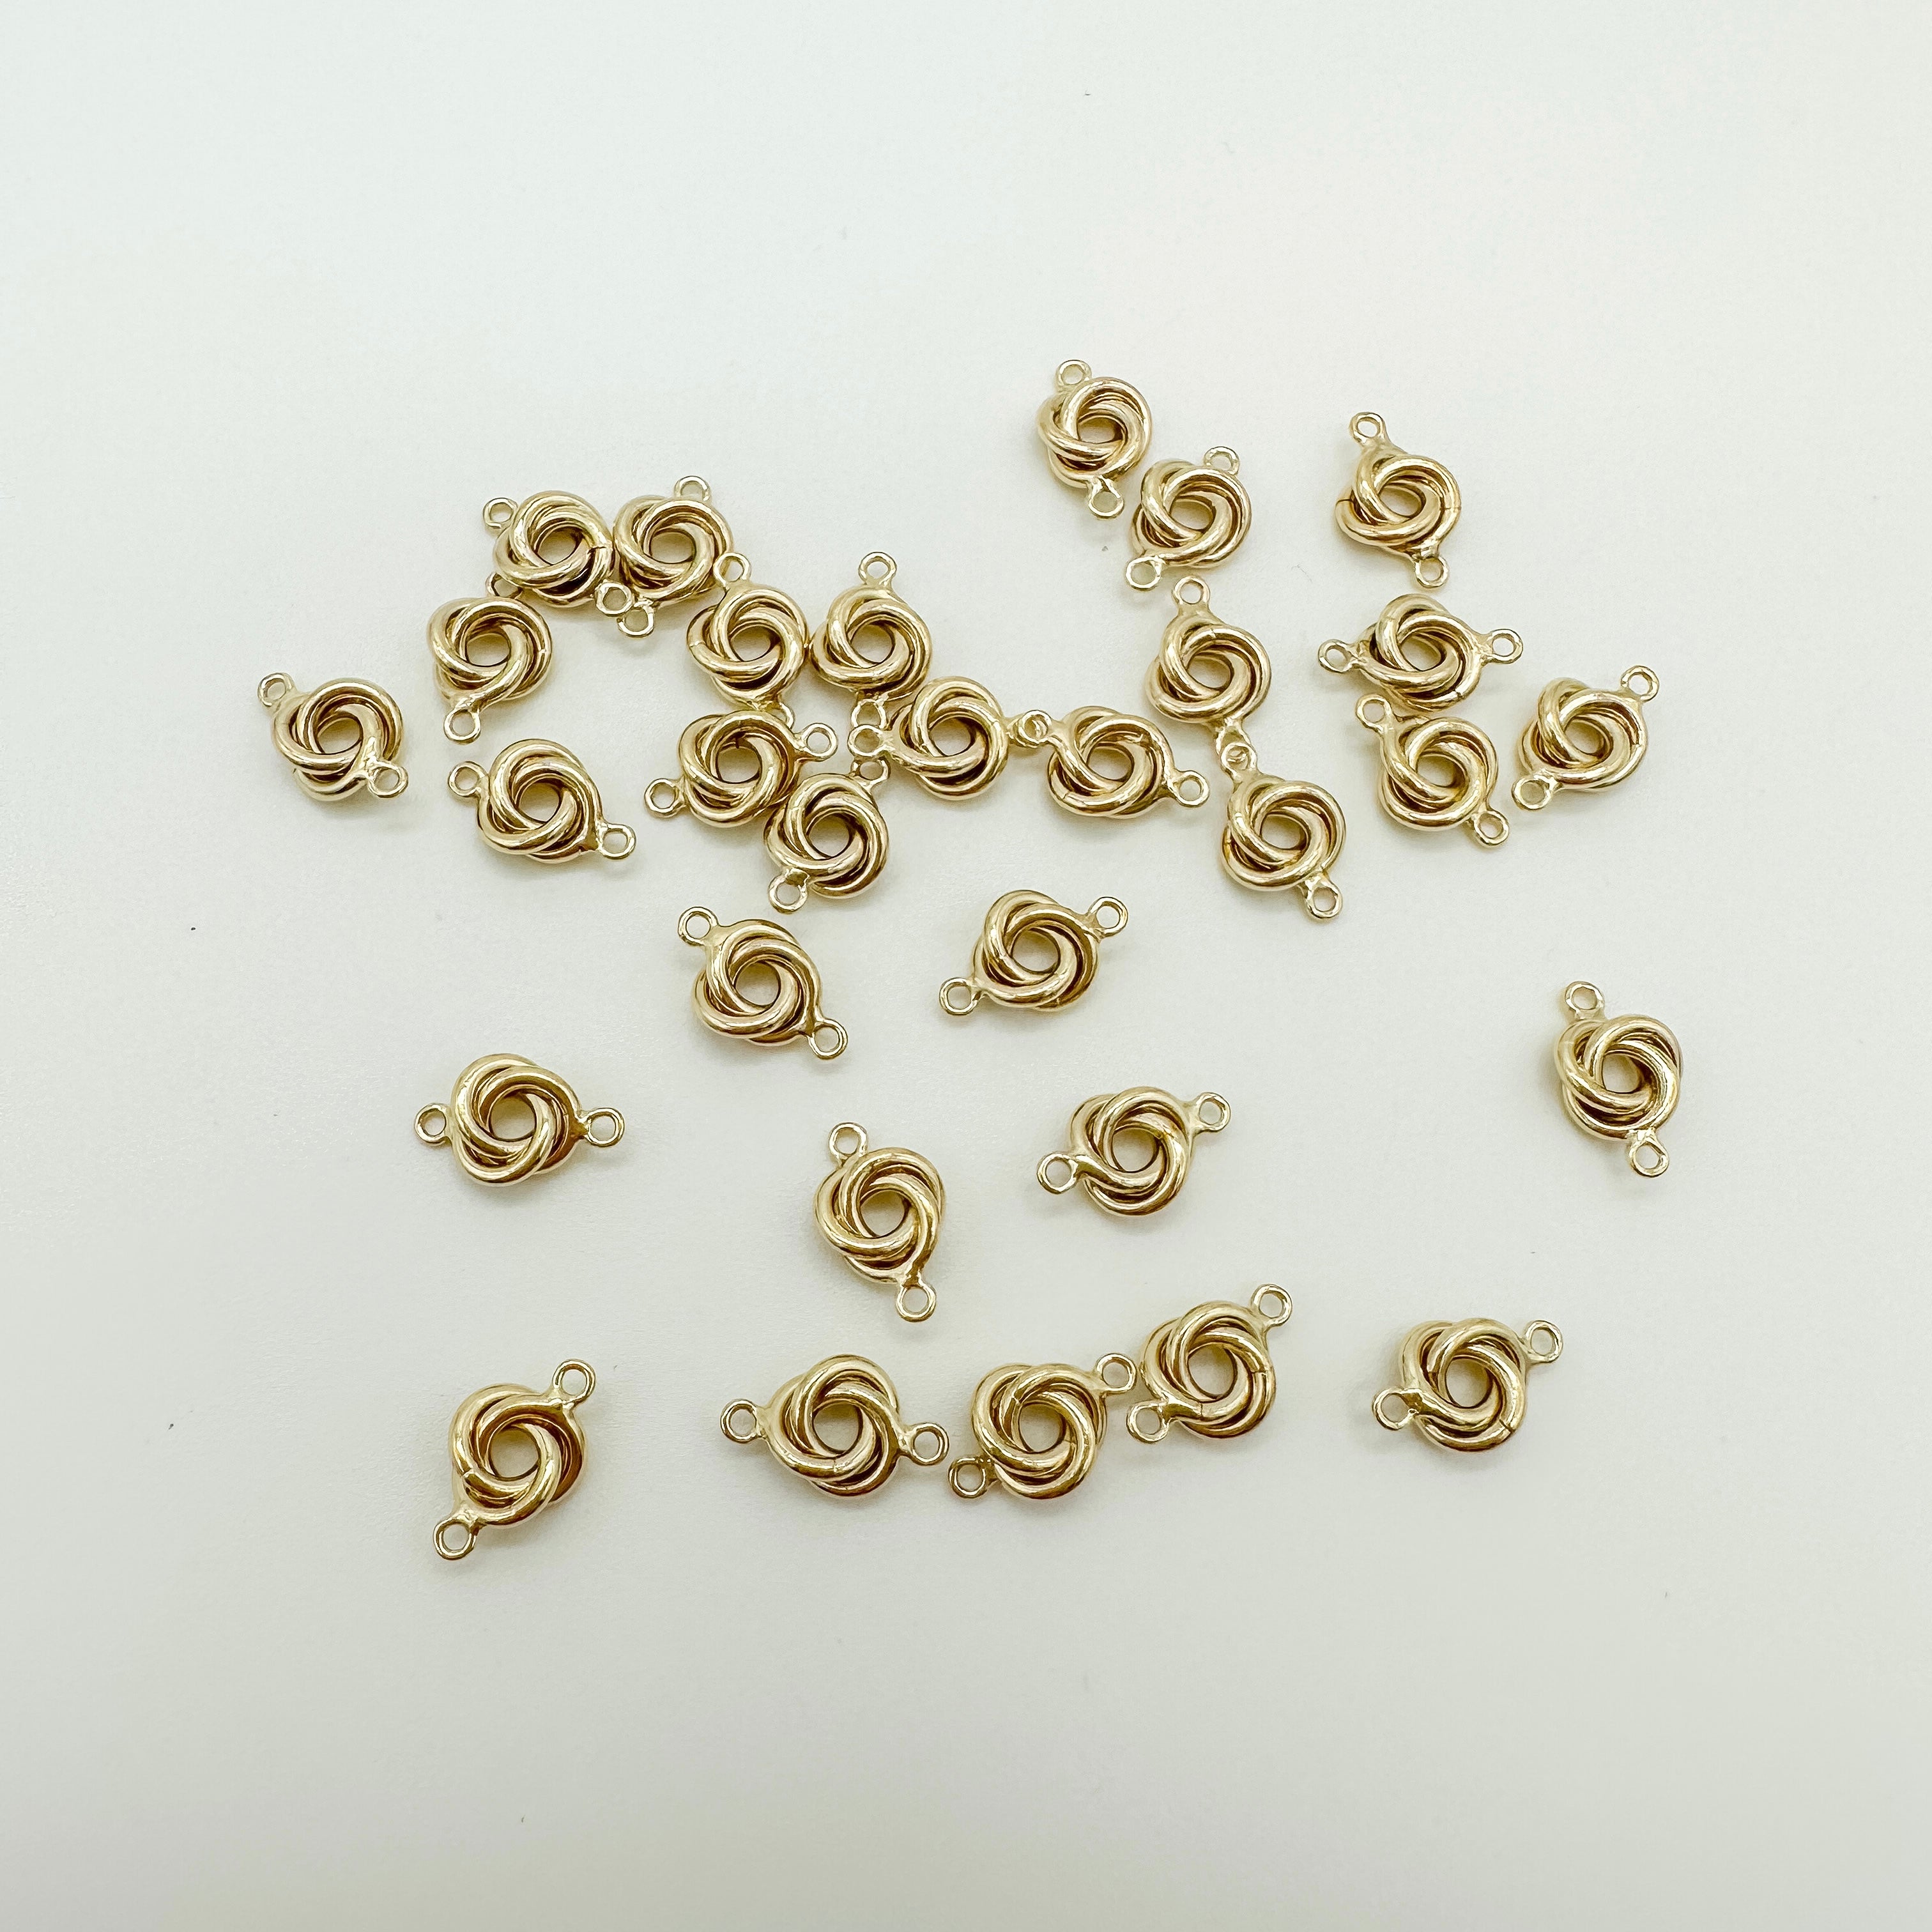 6mm gold filled connector / permanent jewelry supplies / gold filled connectors